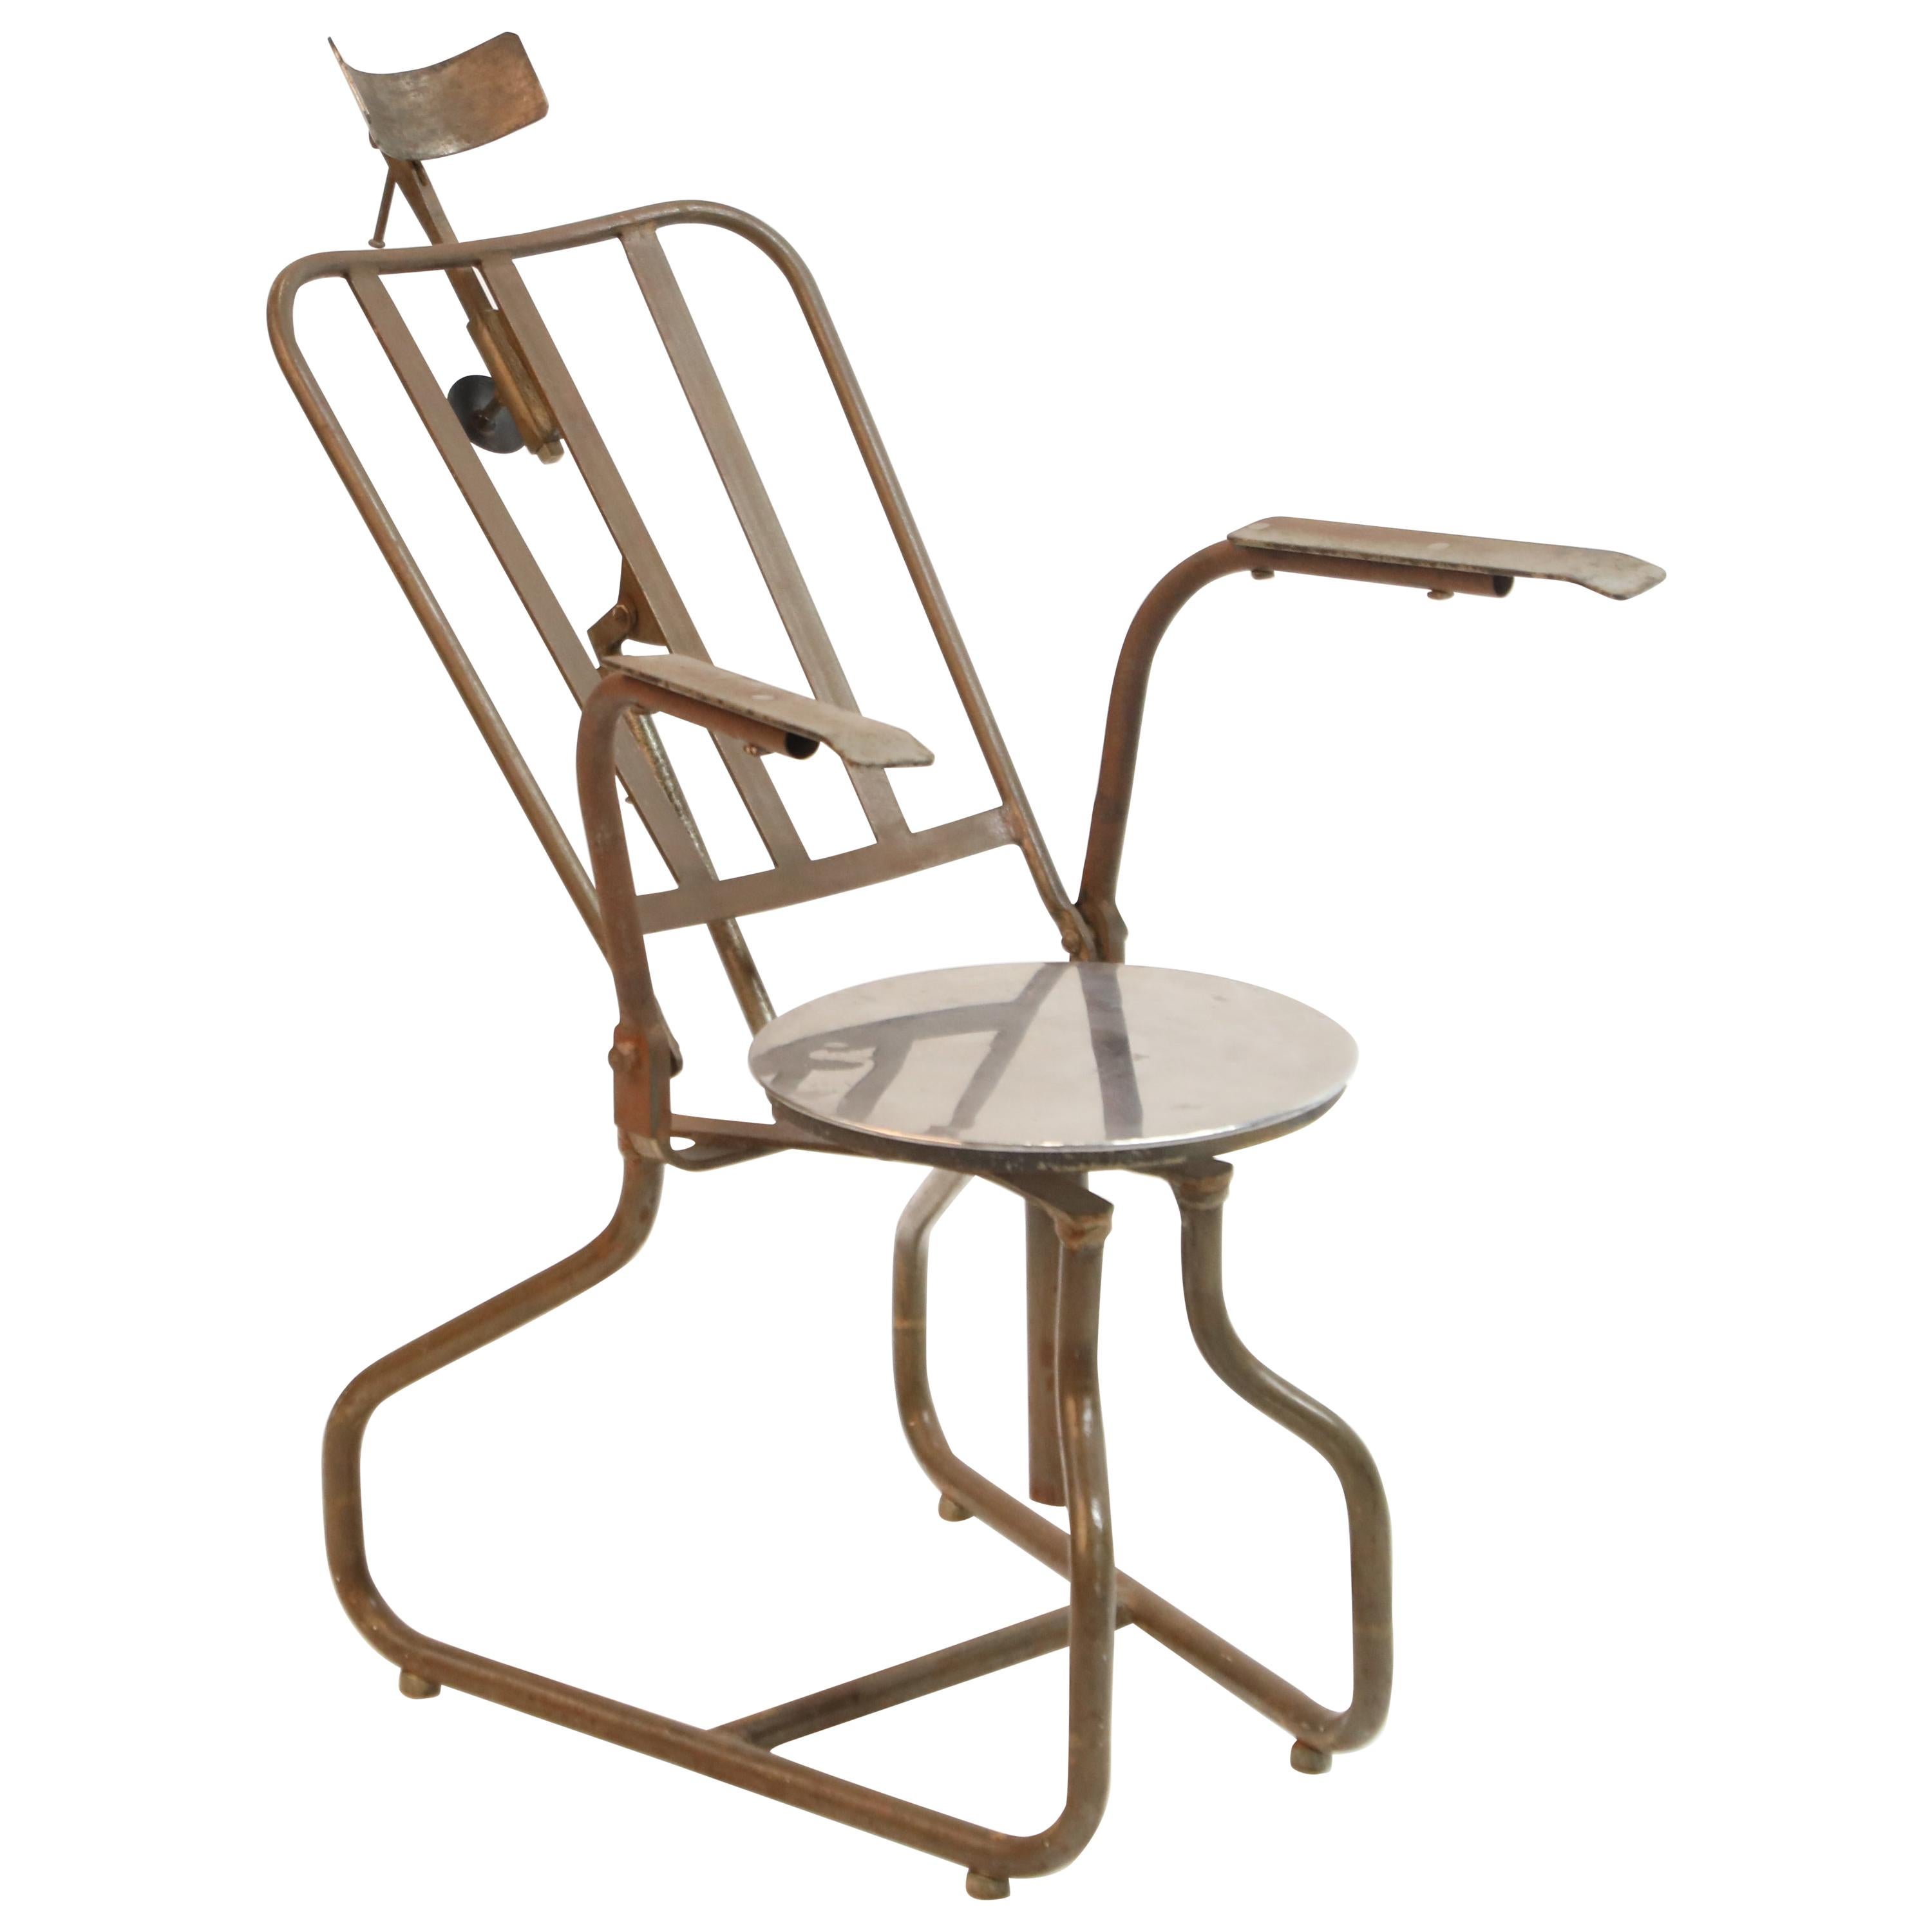 Industrial Steel Dentist Chair or Sculpture from Brazil, circa 1900s